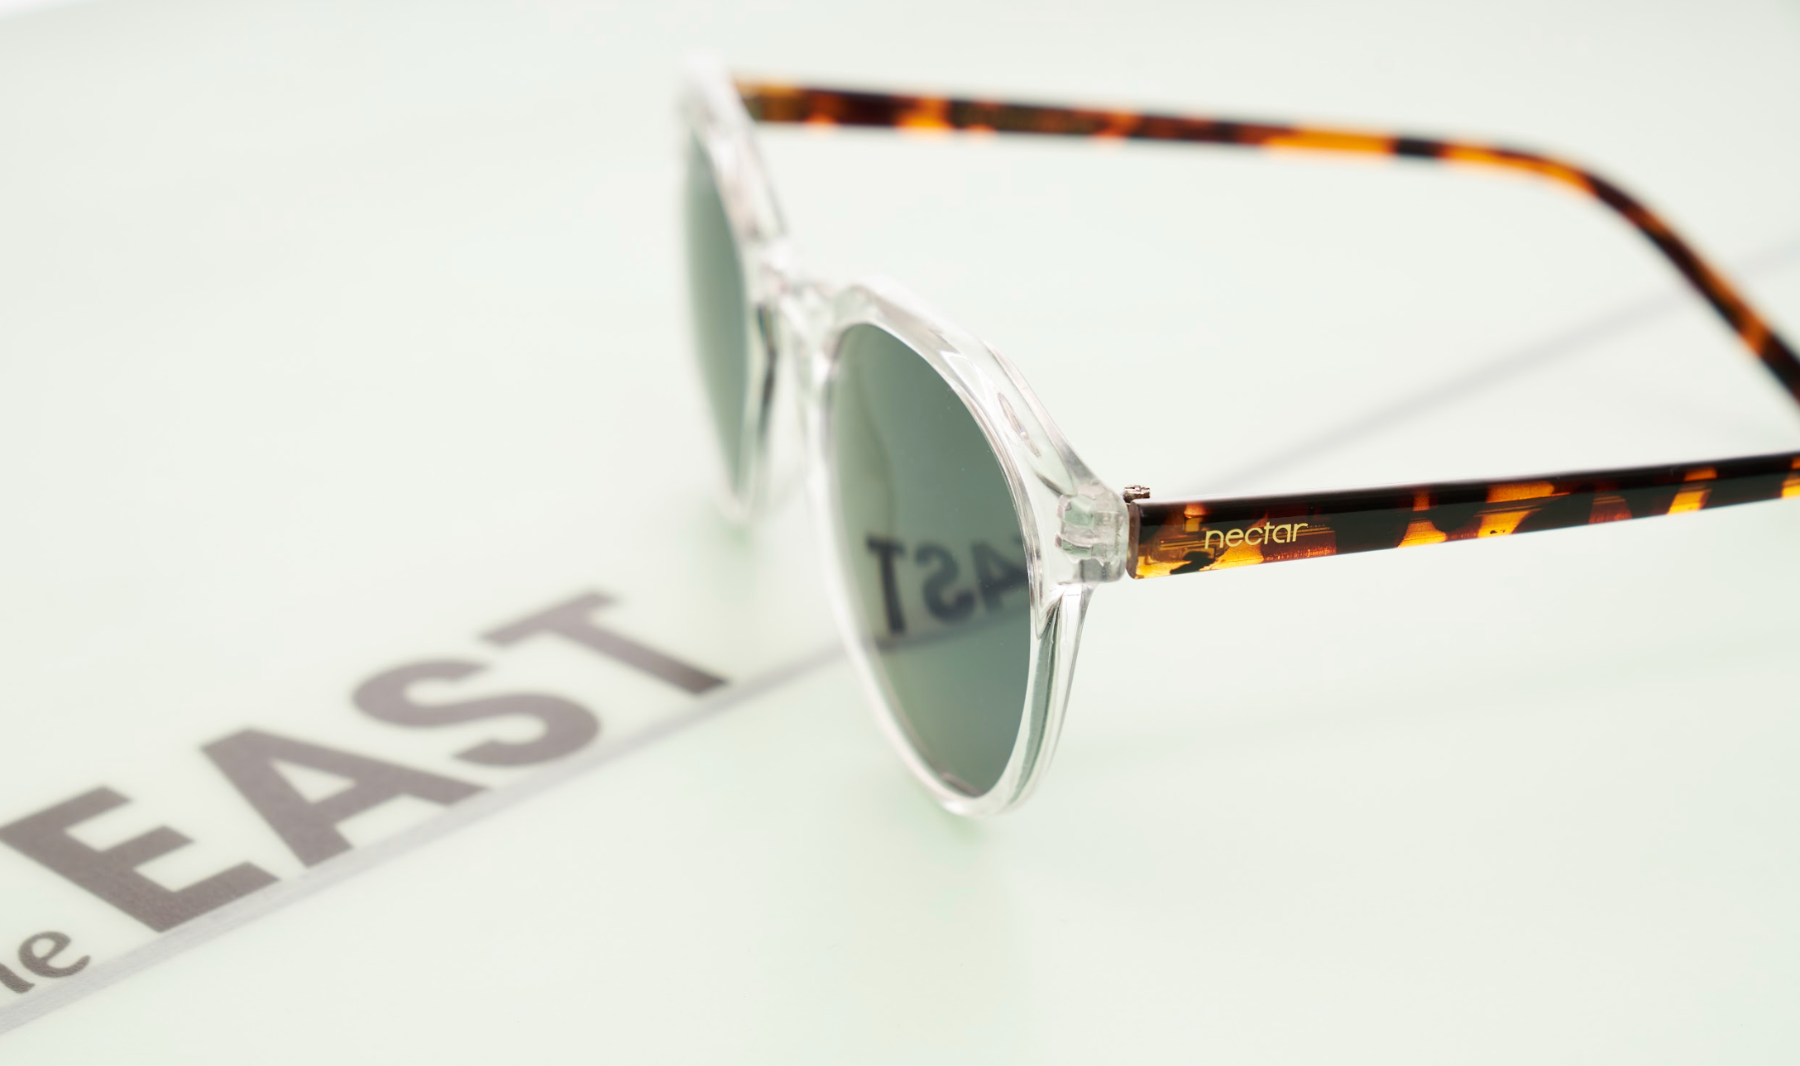 Nectar Sunglasses: Planning for Spring Trips